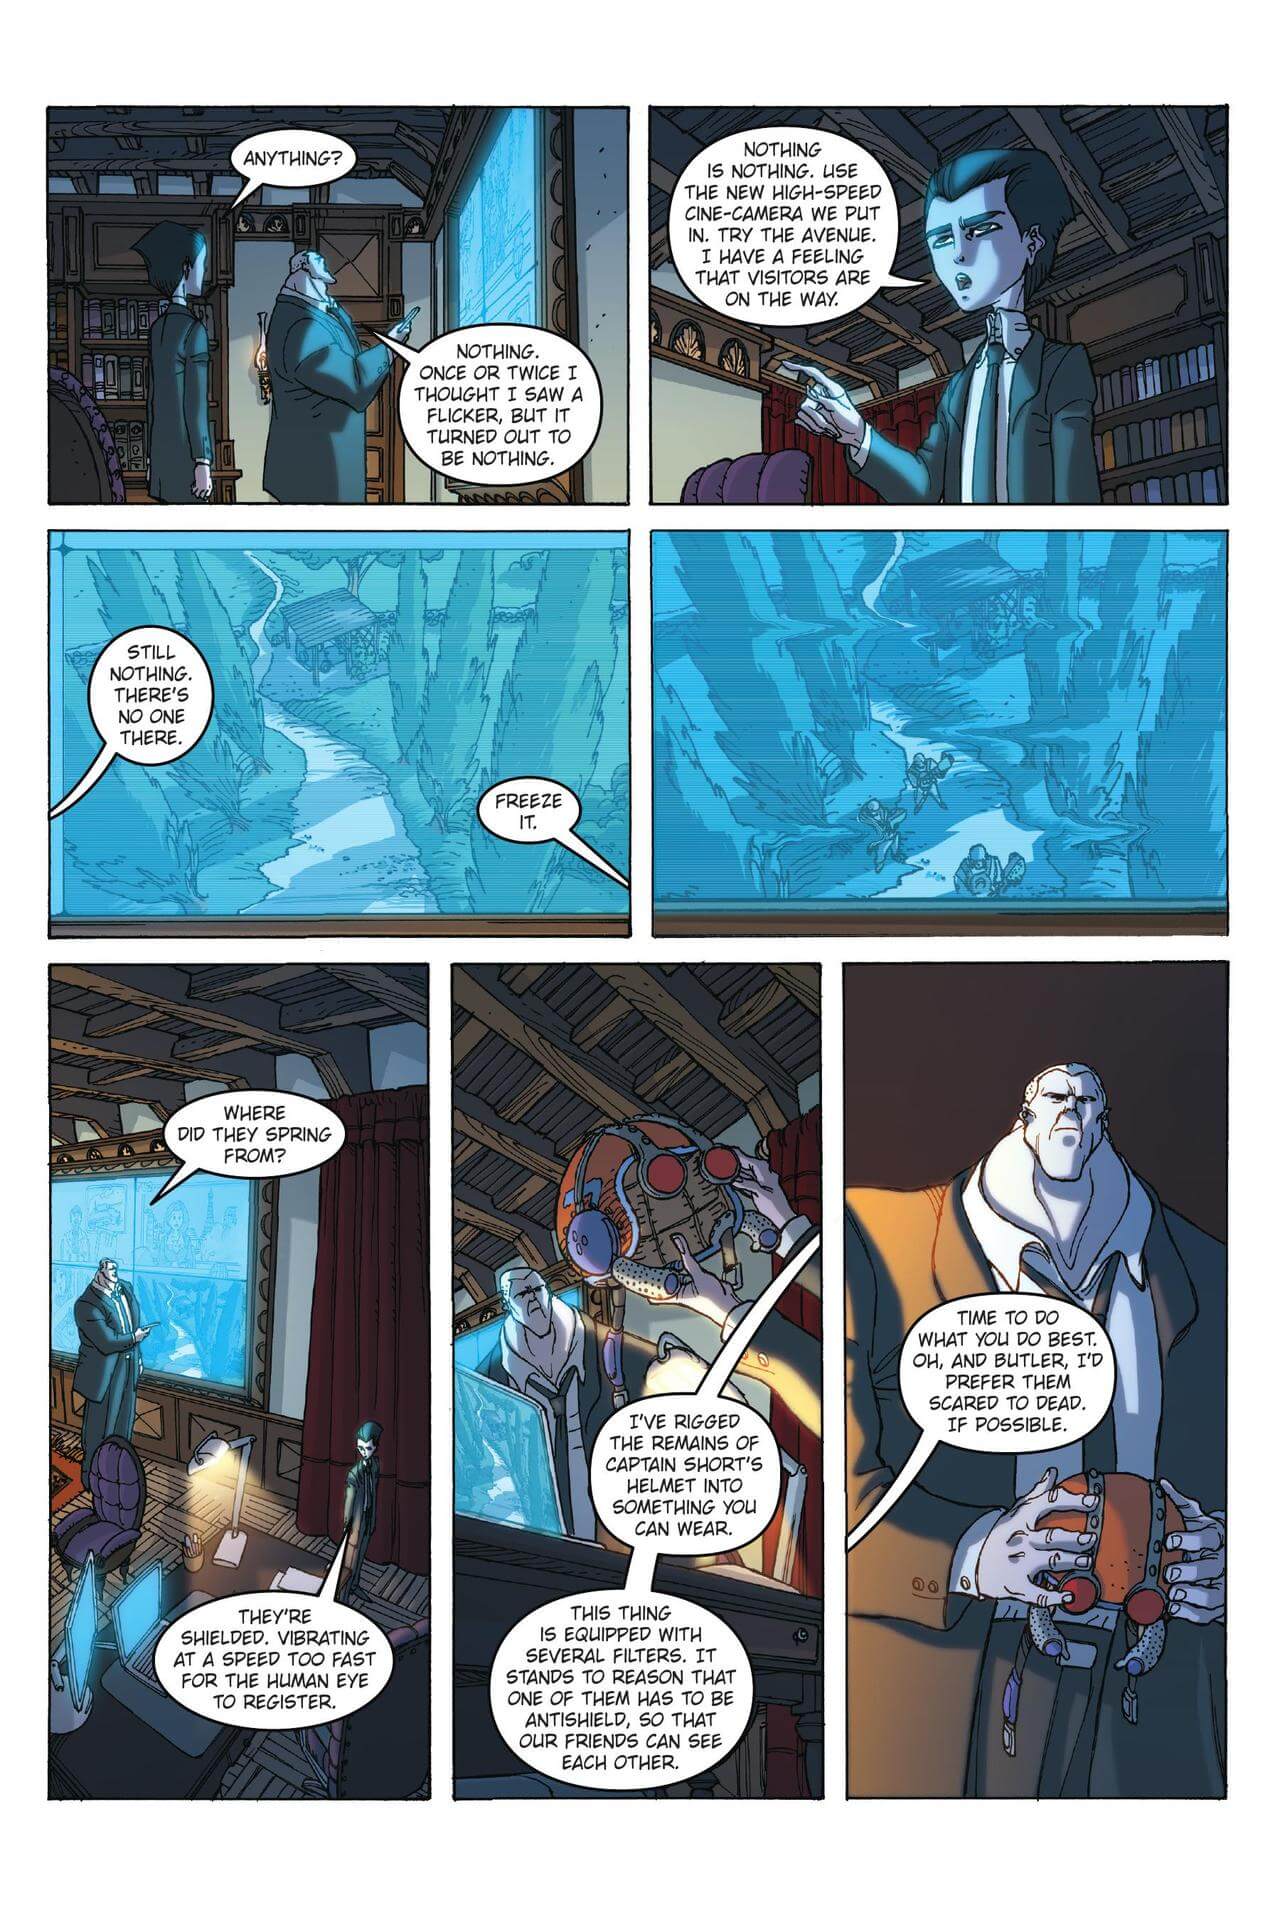 page 52 of artemis fowl the graphic novel